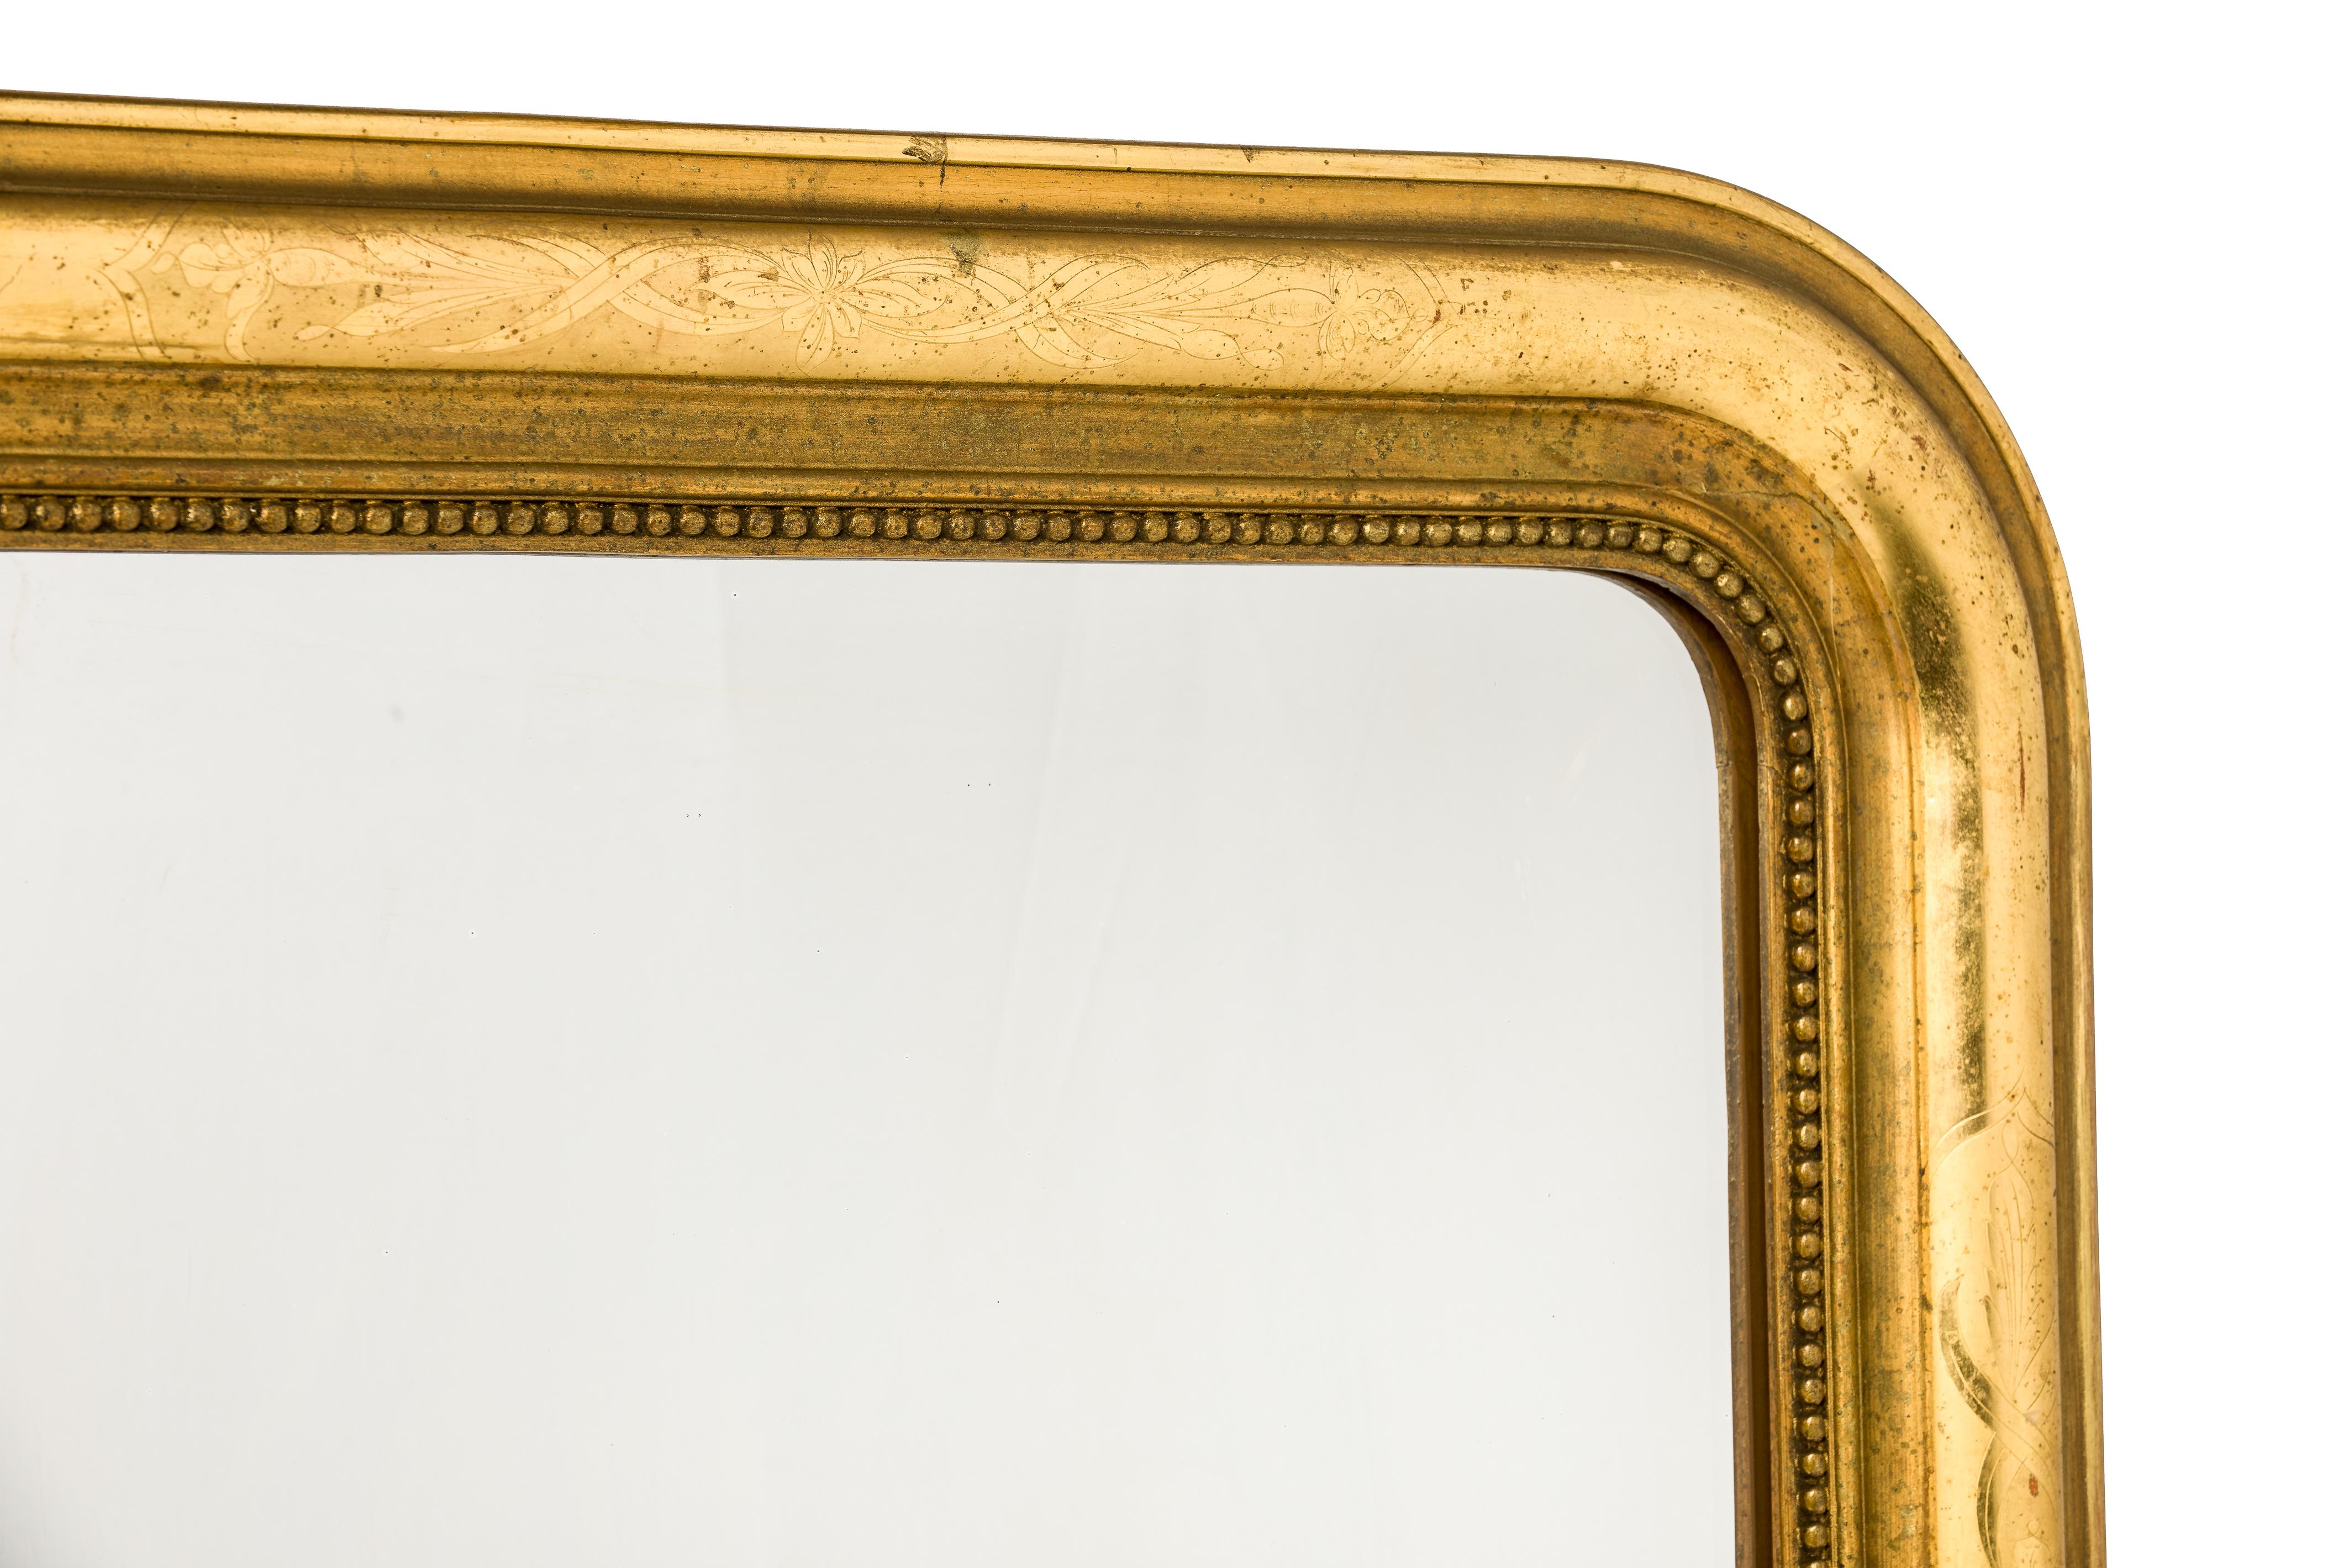 This beautiful Louis Philippe mirror was made in France, circa 1870. The mirror has a solid pine frame smoothened with gesso. The upper rounded corners are typical for the French Louis Philippe style. The authentic glass is surrounded by a classic